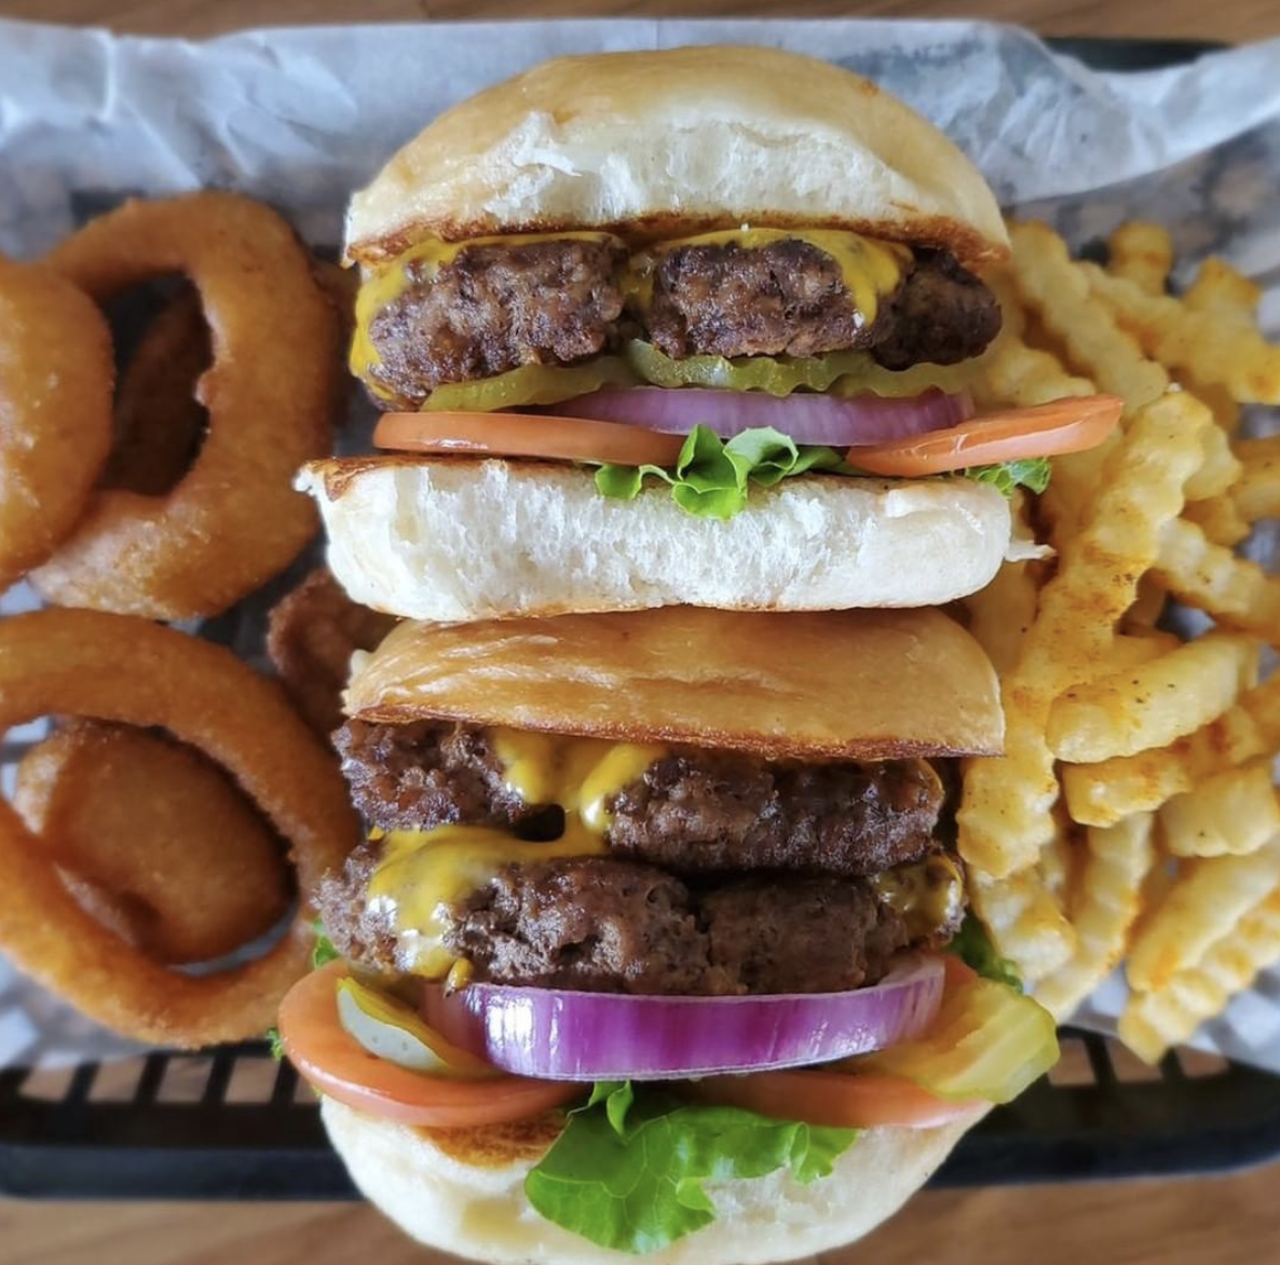 Mark's Outing
1624 E Commerce St., (210) 299-8110, marksouting.com
Formerly known as Fatty’s Burgers, this eastside staple serves up delectable, stick-to-your-ribs eats amid comfy neighborhood vibes. Don’t miss out on the slow-simmered beans! 
Photo via Instagram / marksouting